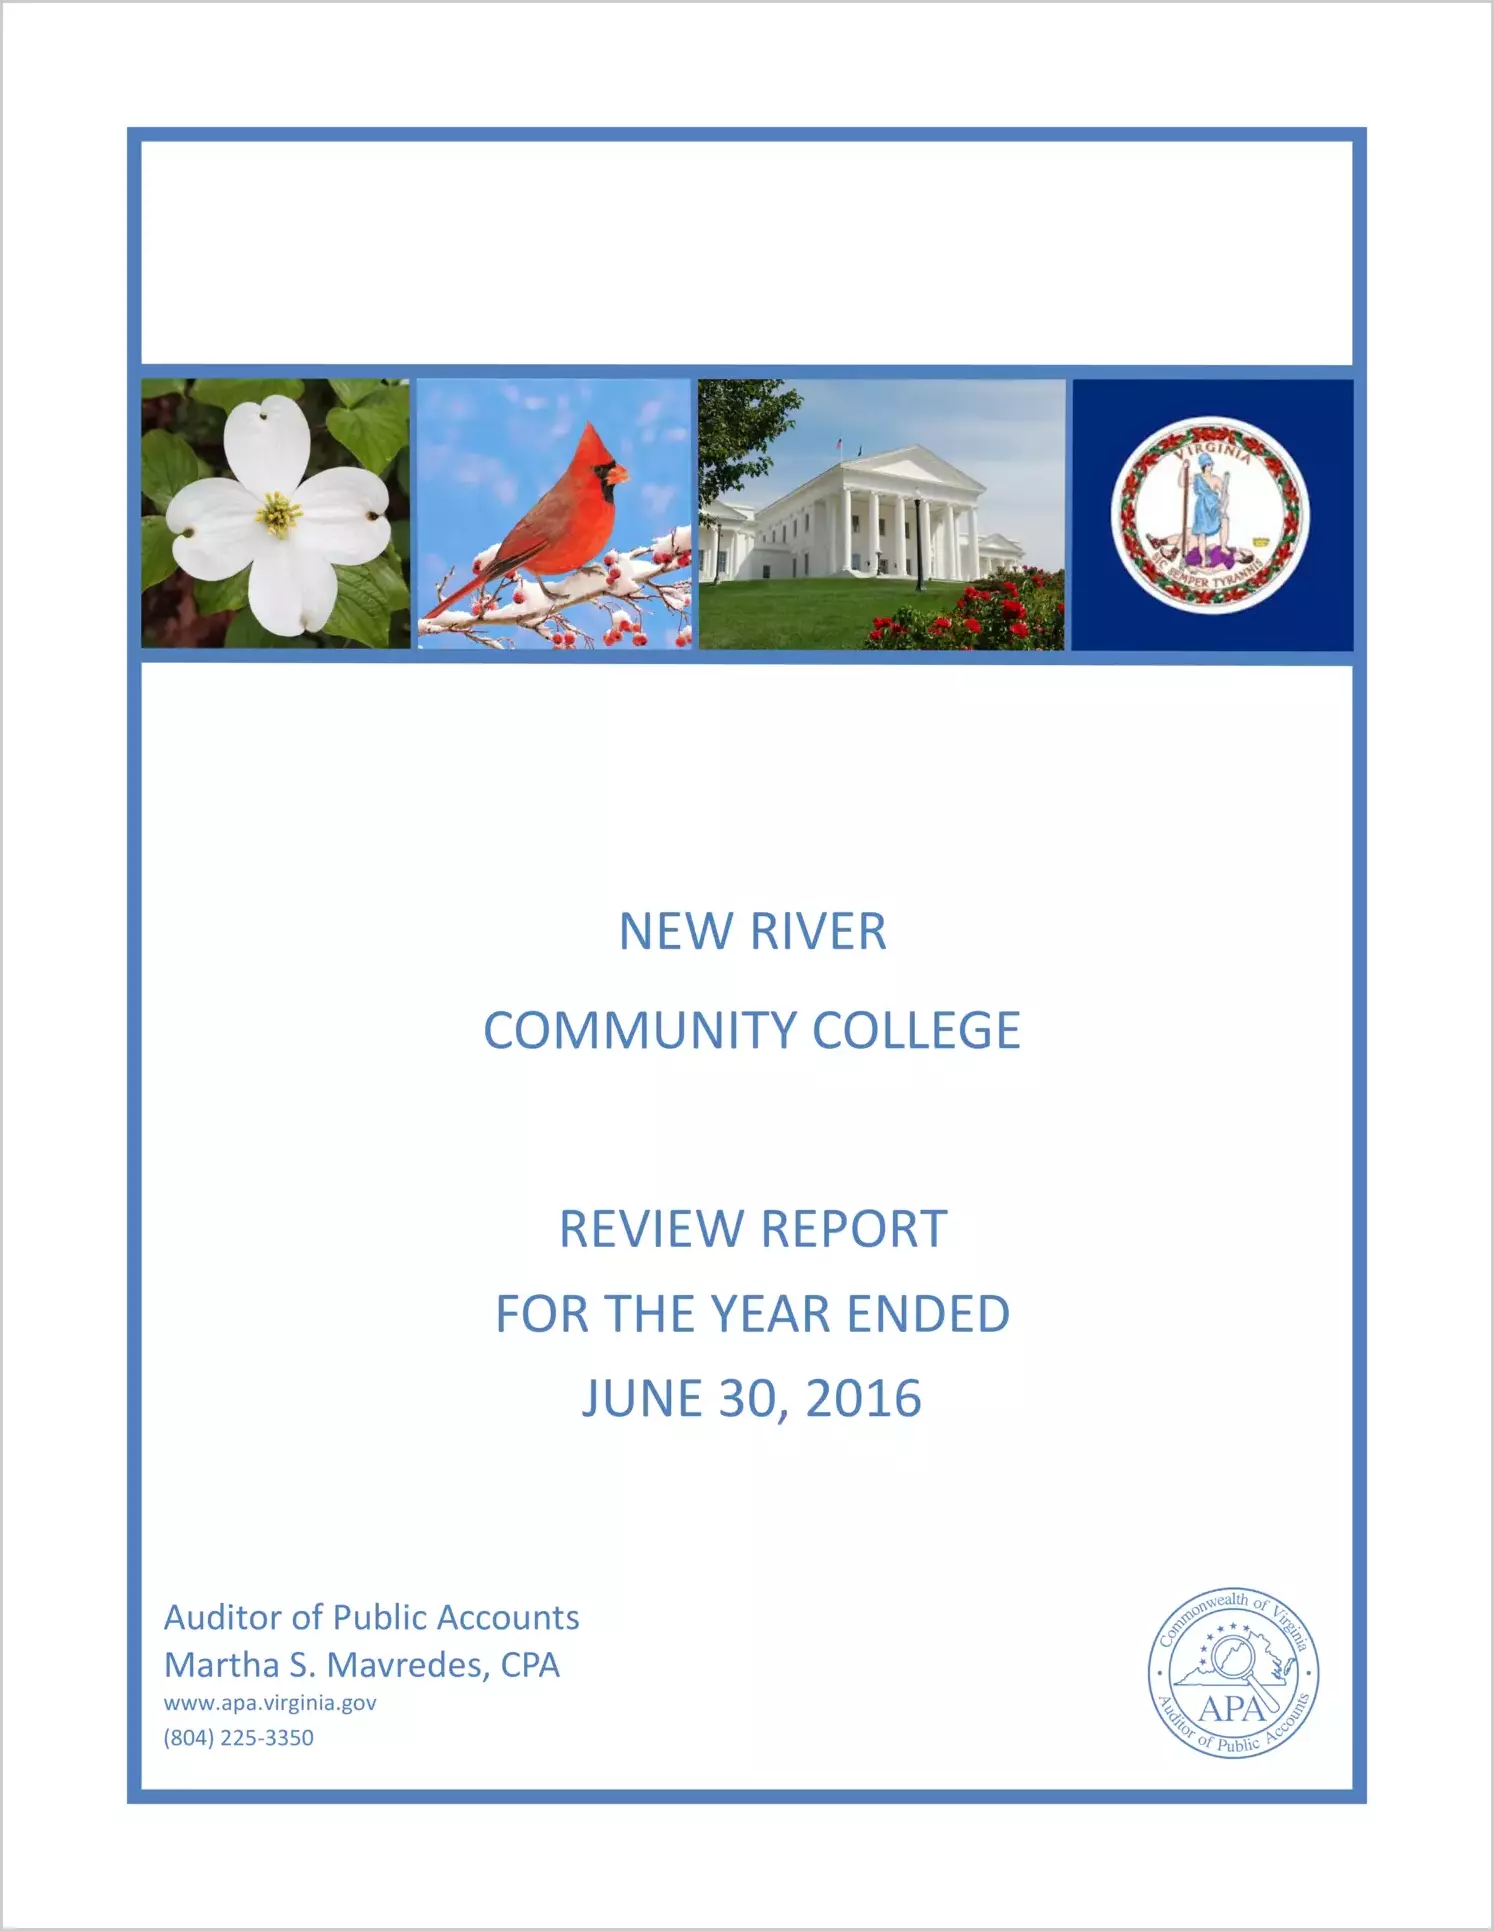 New River Community College Review Report for the year ended June 30, 2016